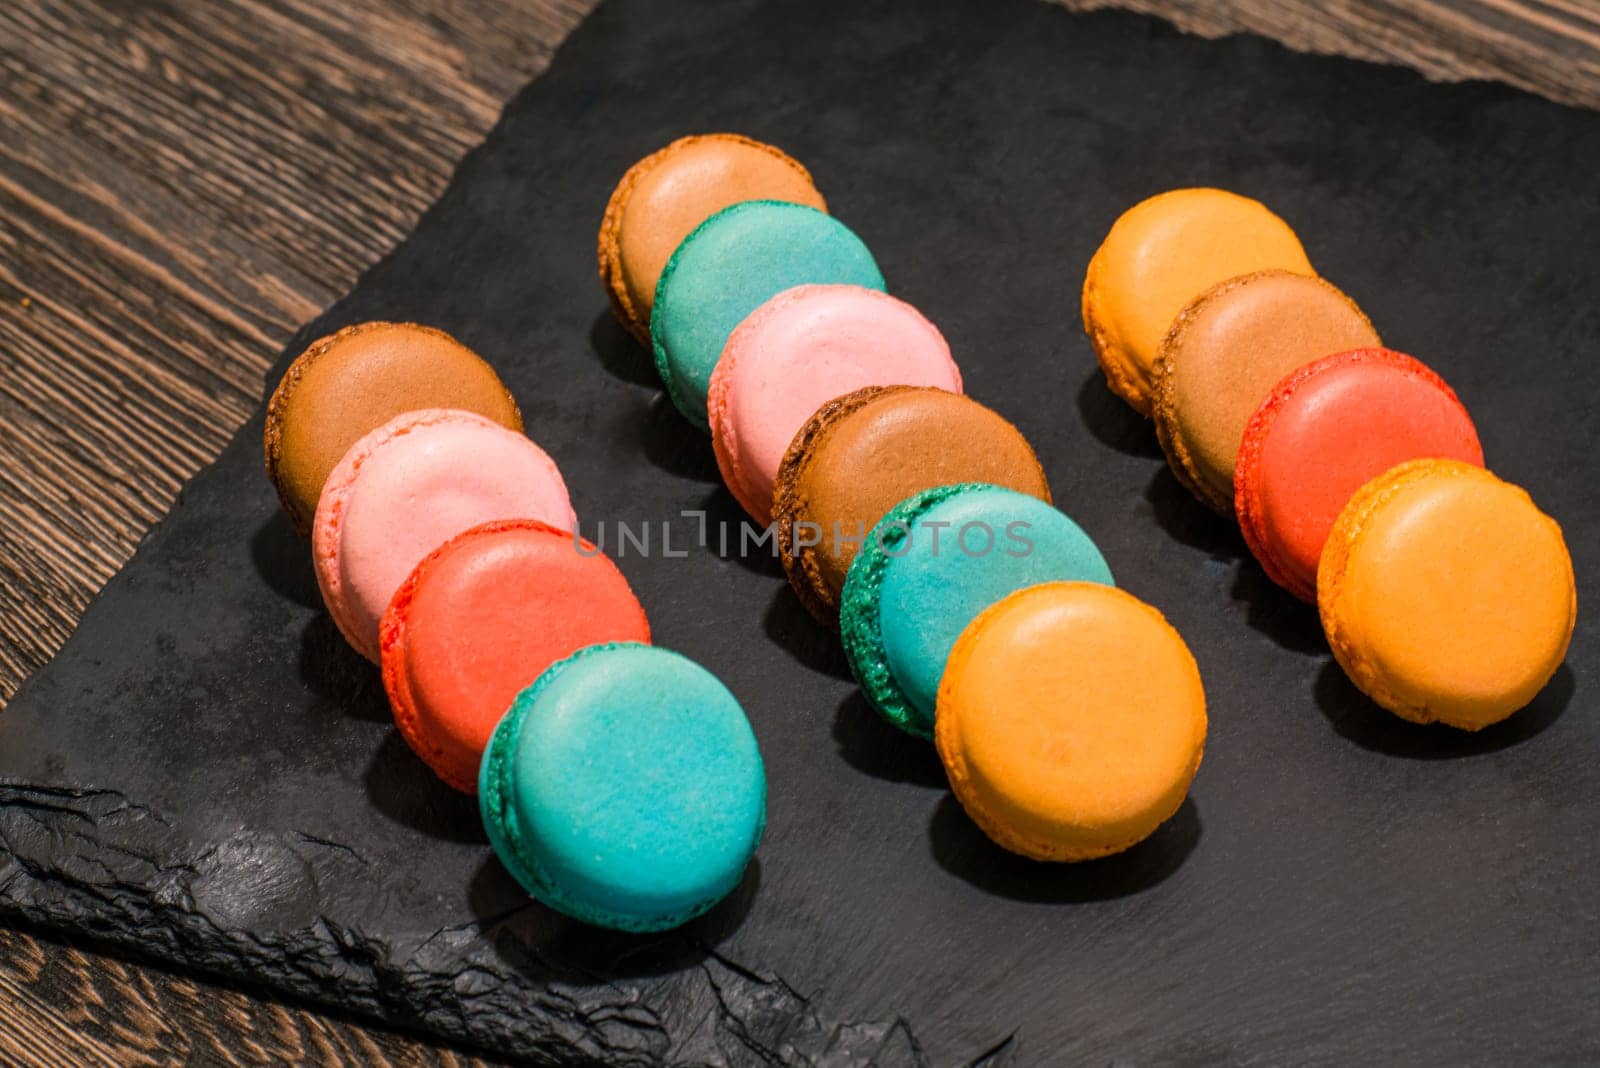 The multicolored French macaroon cookies on a black stone